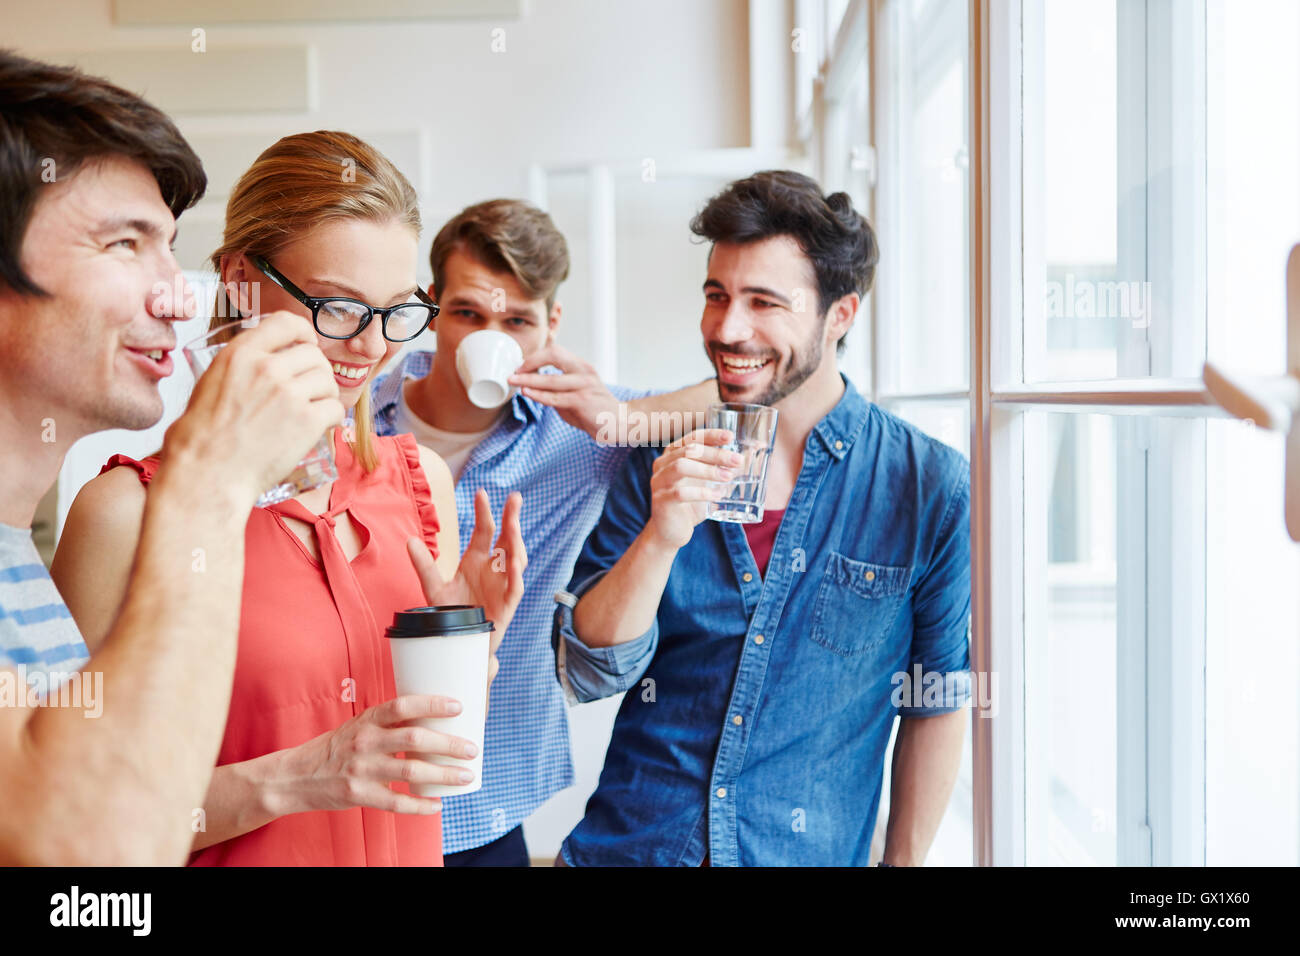 Group of students taking a coffe break for relaxation Stock Photo